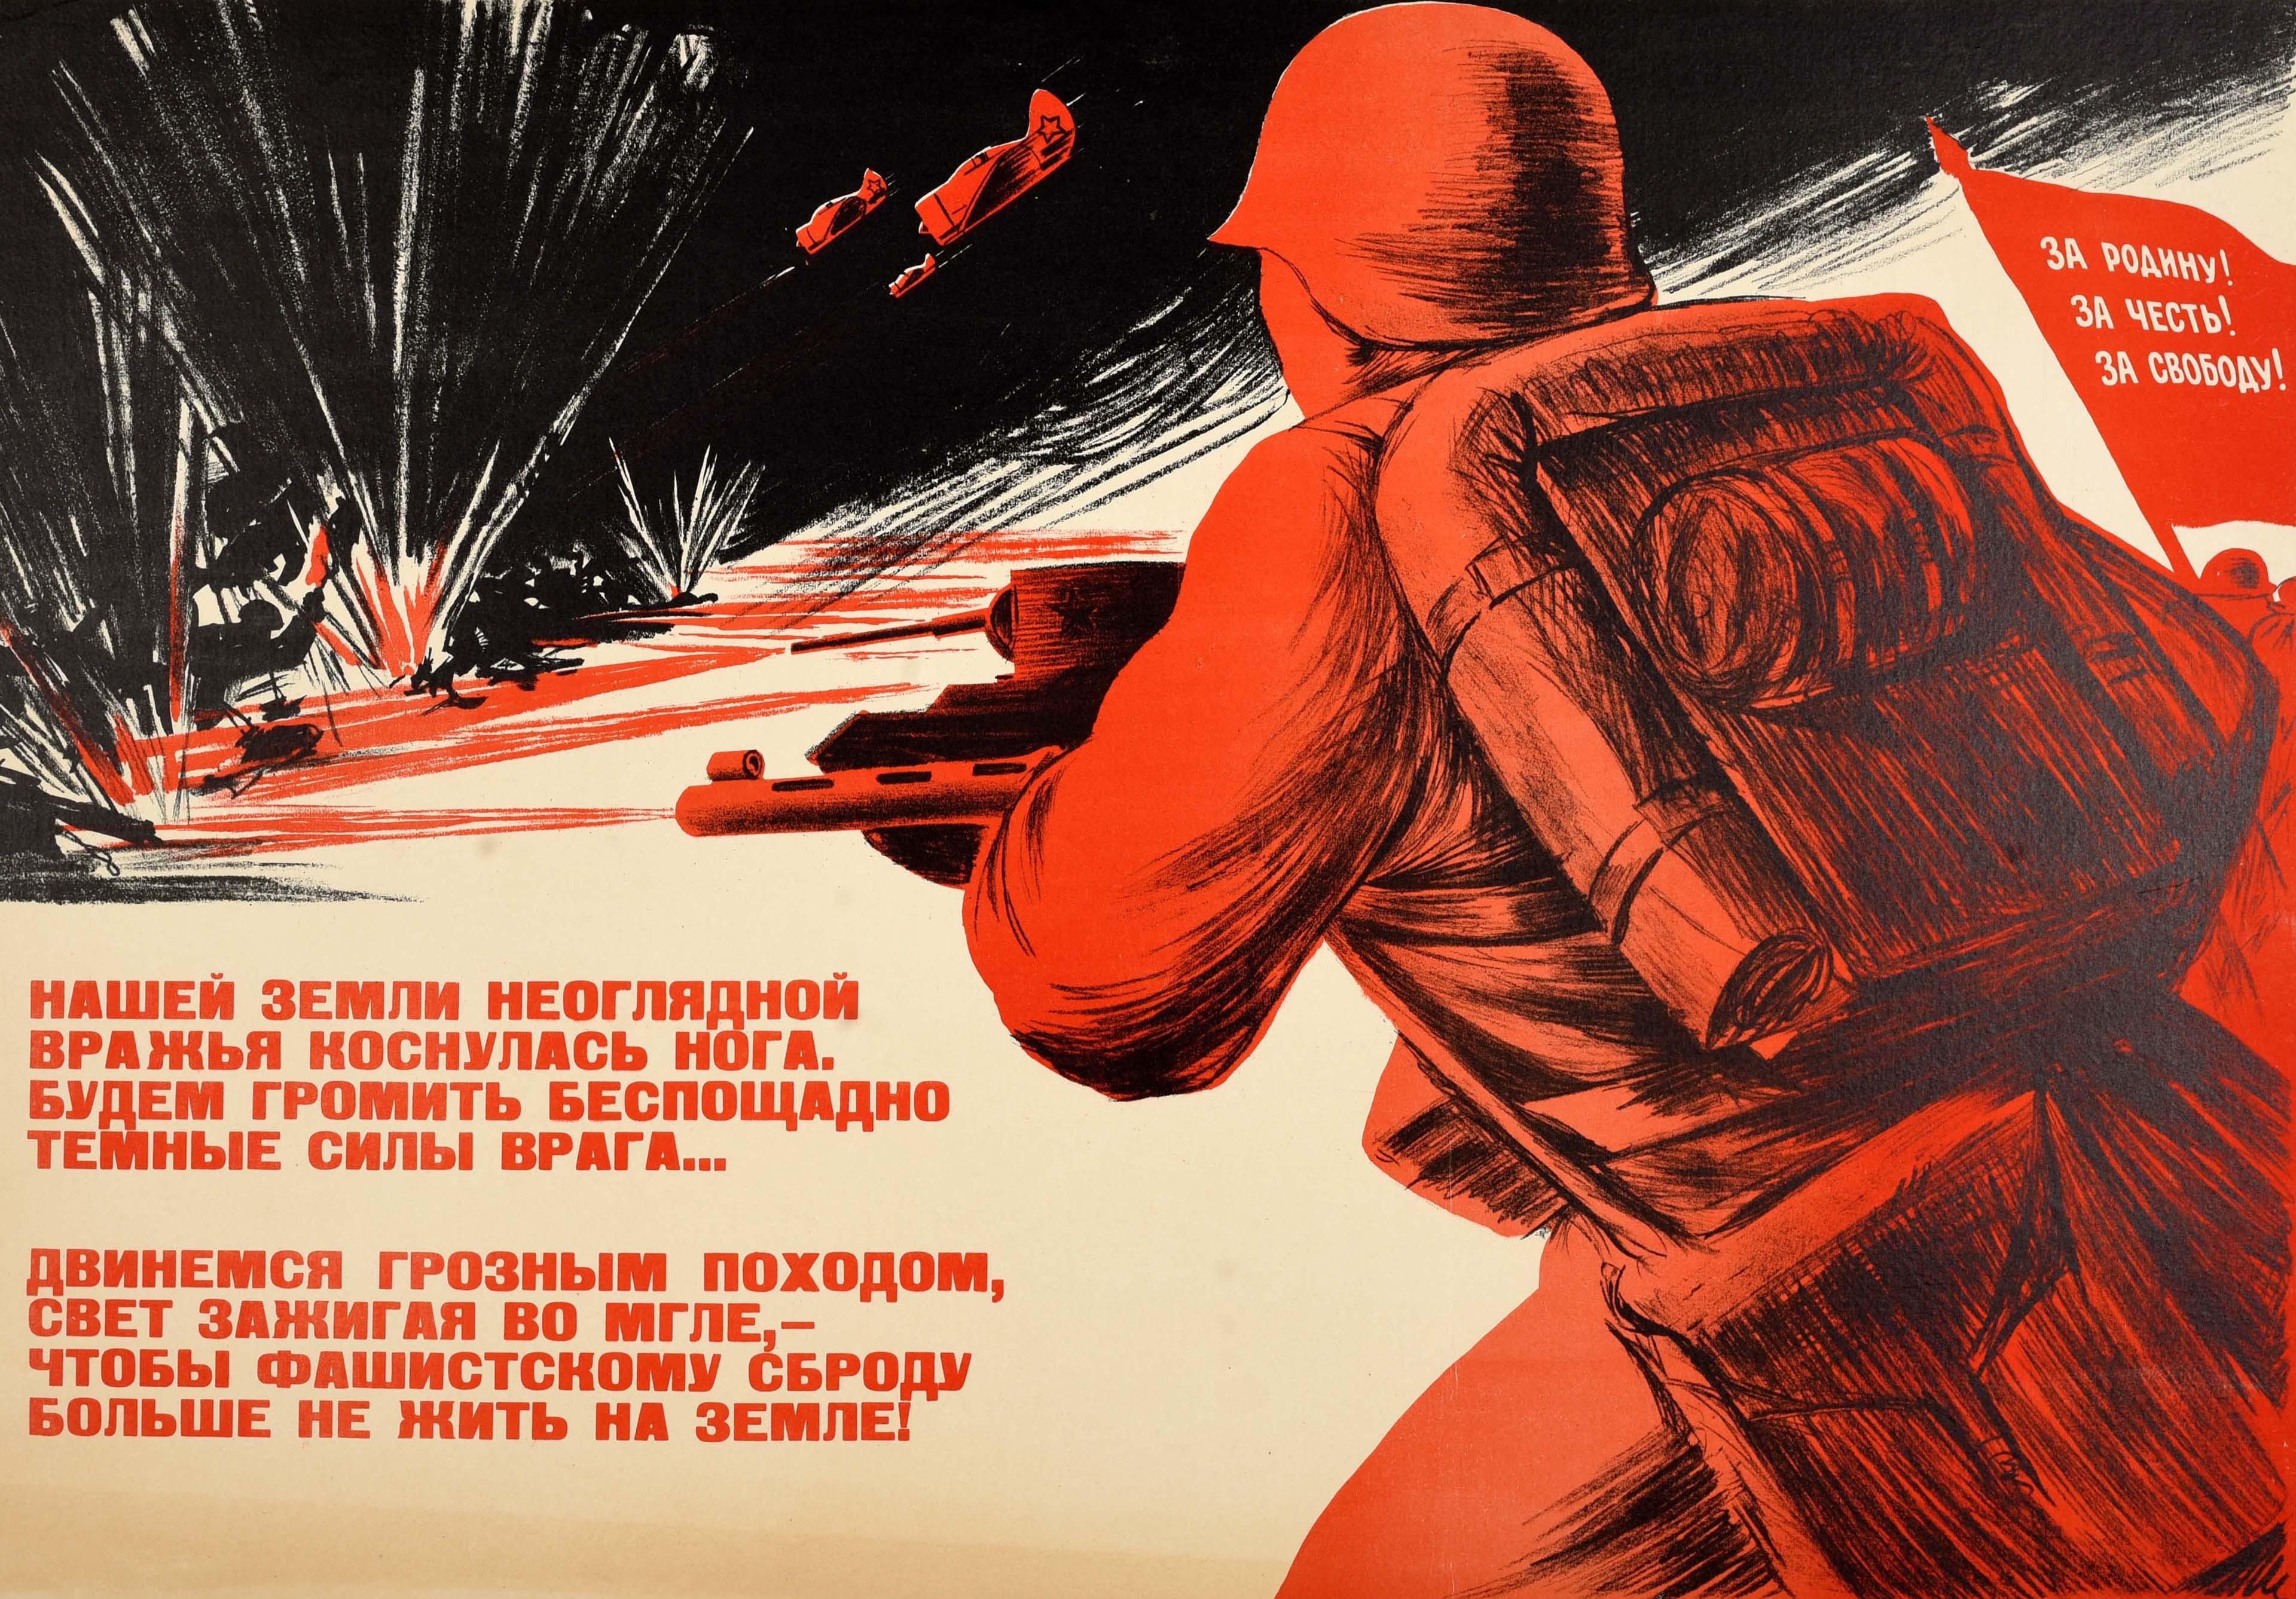 Original vintage Soviet World War Two propaganda poster - Our land has been touched by the infinite enemy We will smash the enemy's dark forces mercilessly ... Let's move on a terrible campaign, lighting a light in the darkness, so that the fascist